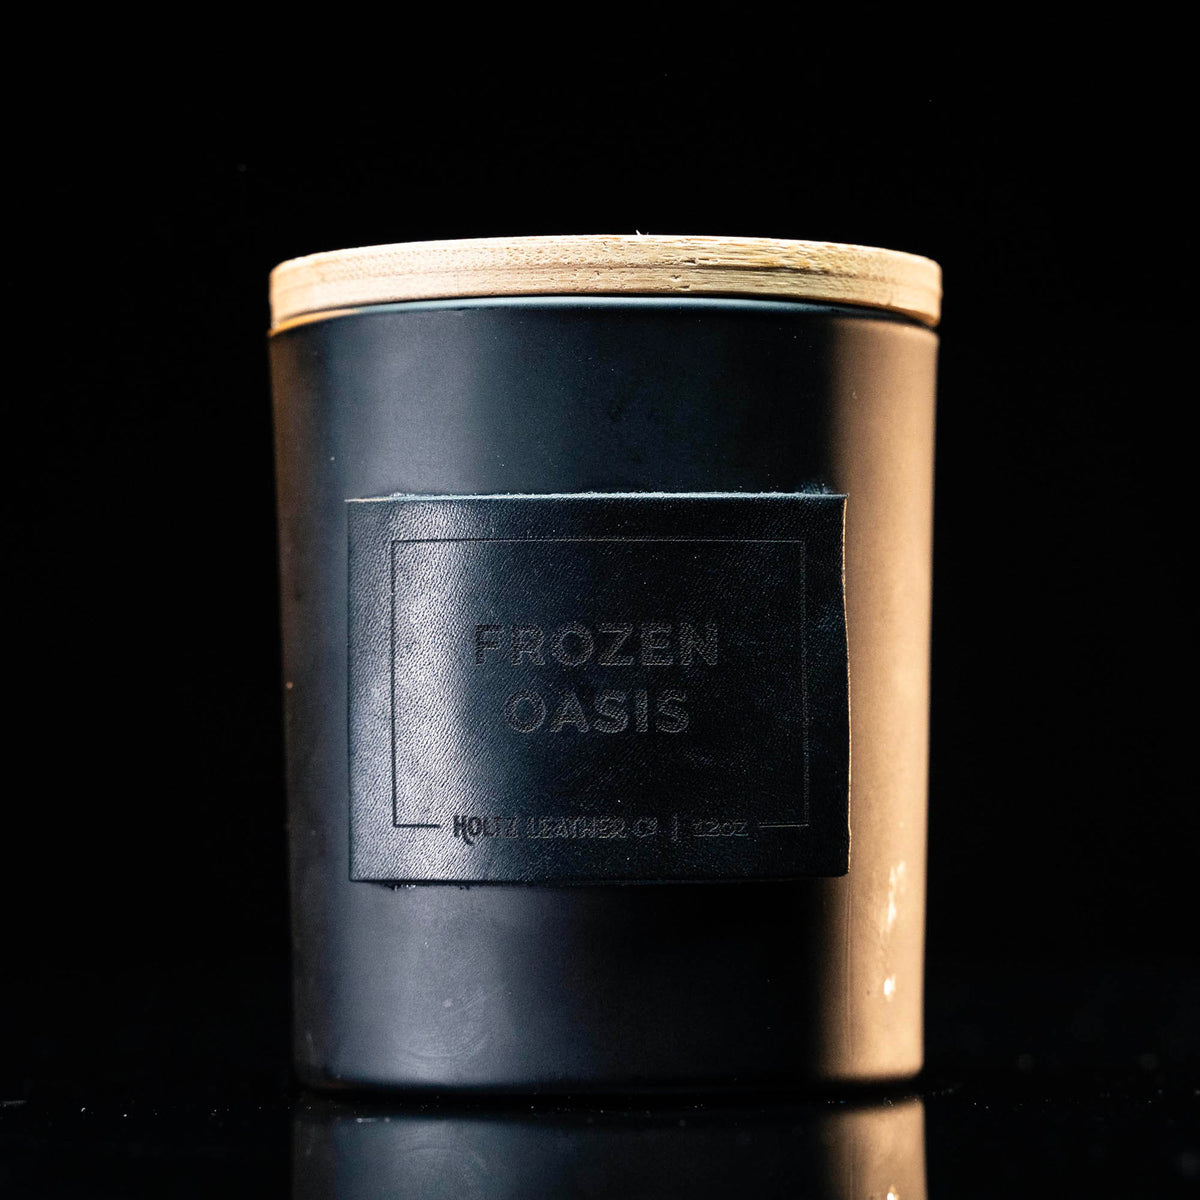 Frozen Oasis - Smolder Luxe Masculine Scented Leather Patch Candle